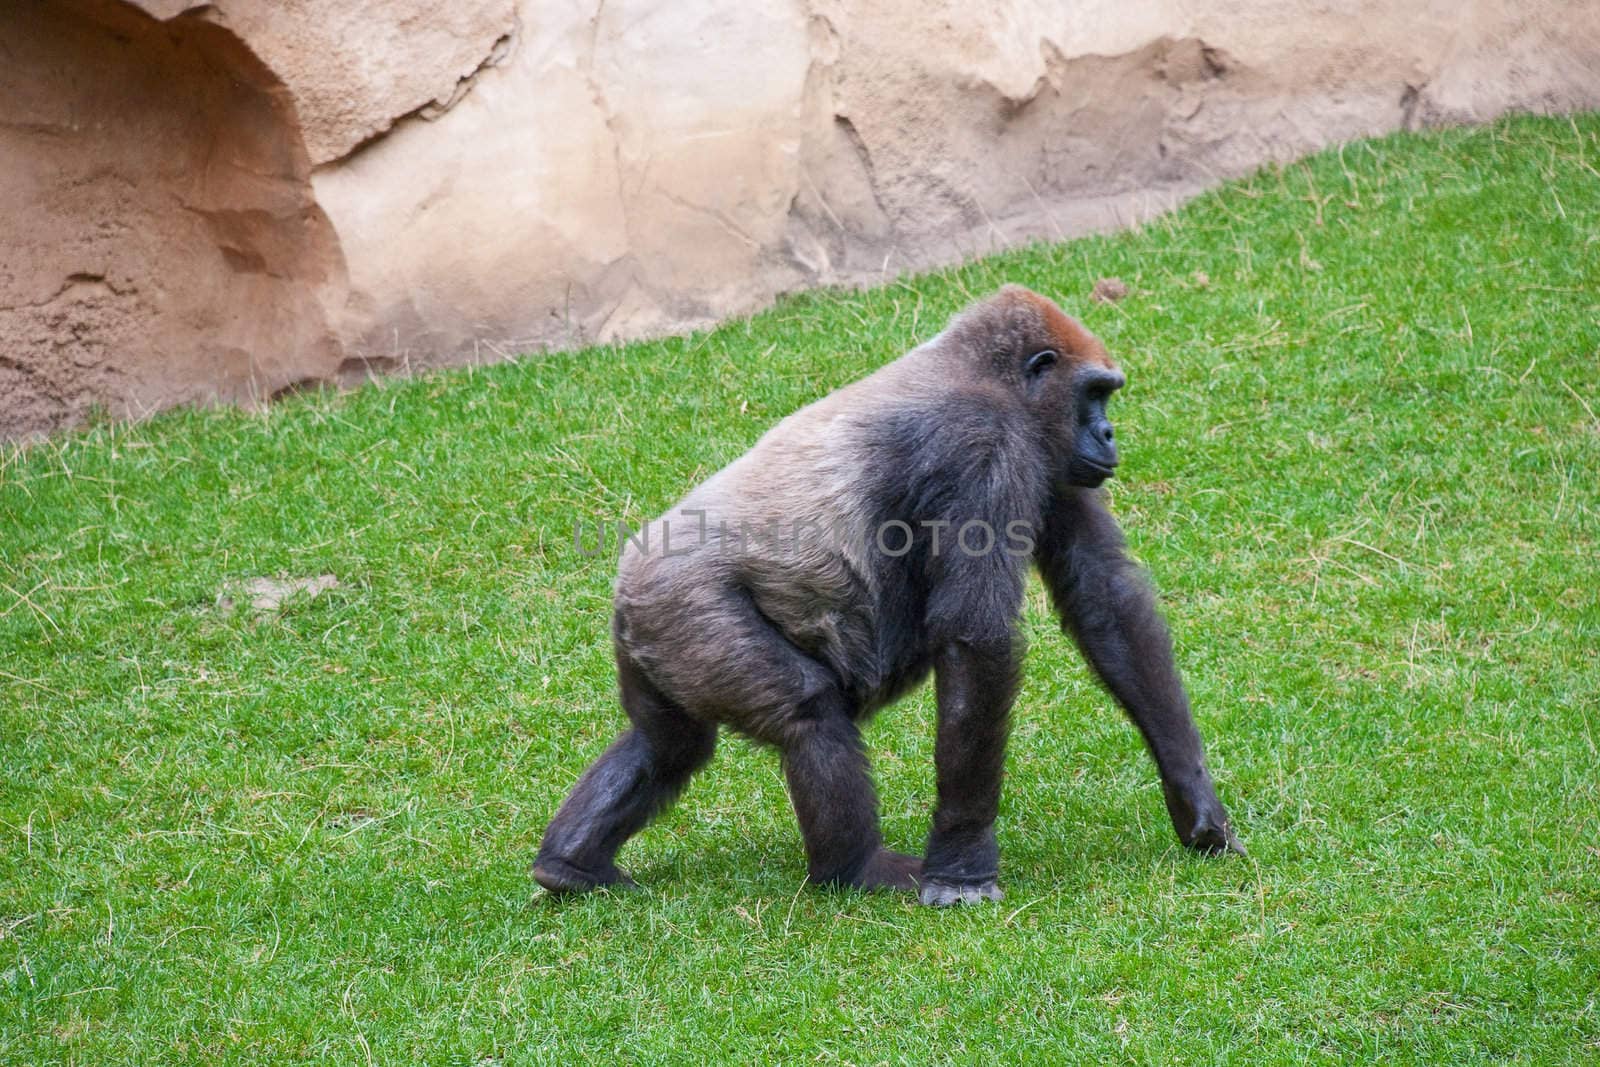 Male Silverback Gorilla goes on the grass